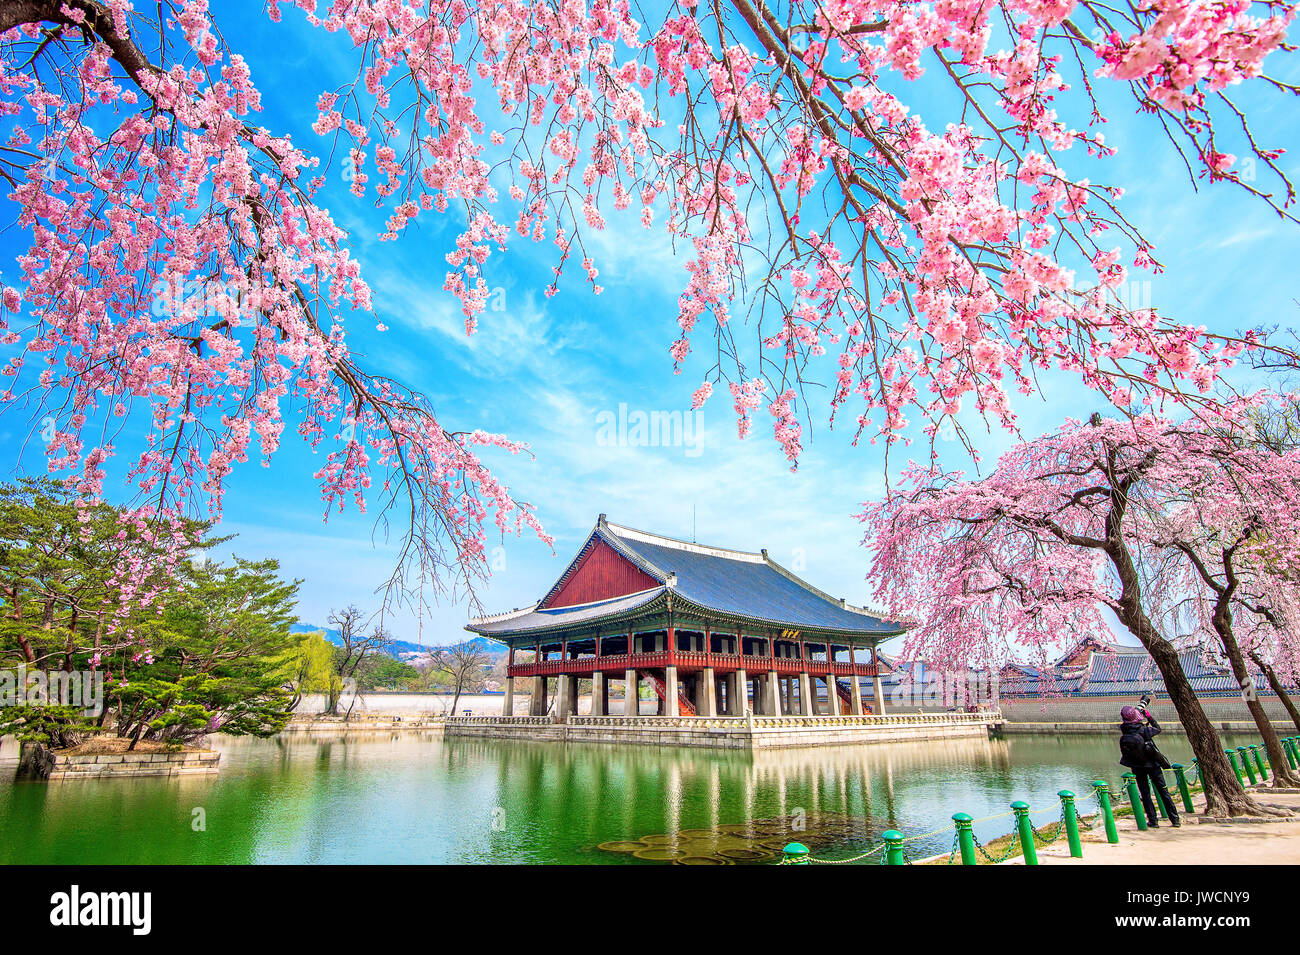 SEOUL, SOUTH KOREA - APRIL 6: Tourists taking photos of the beautiful scenery around Gyeongbokgung Palace with cherry blossom in spring on April 6, 20 Stock Photo